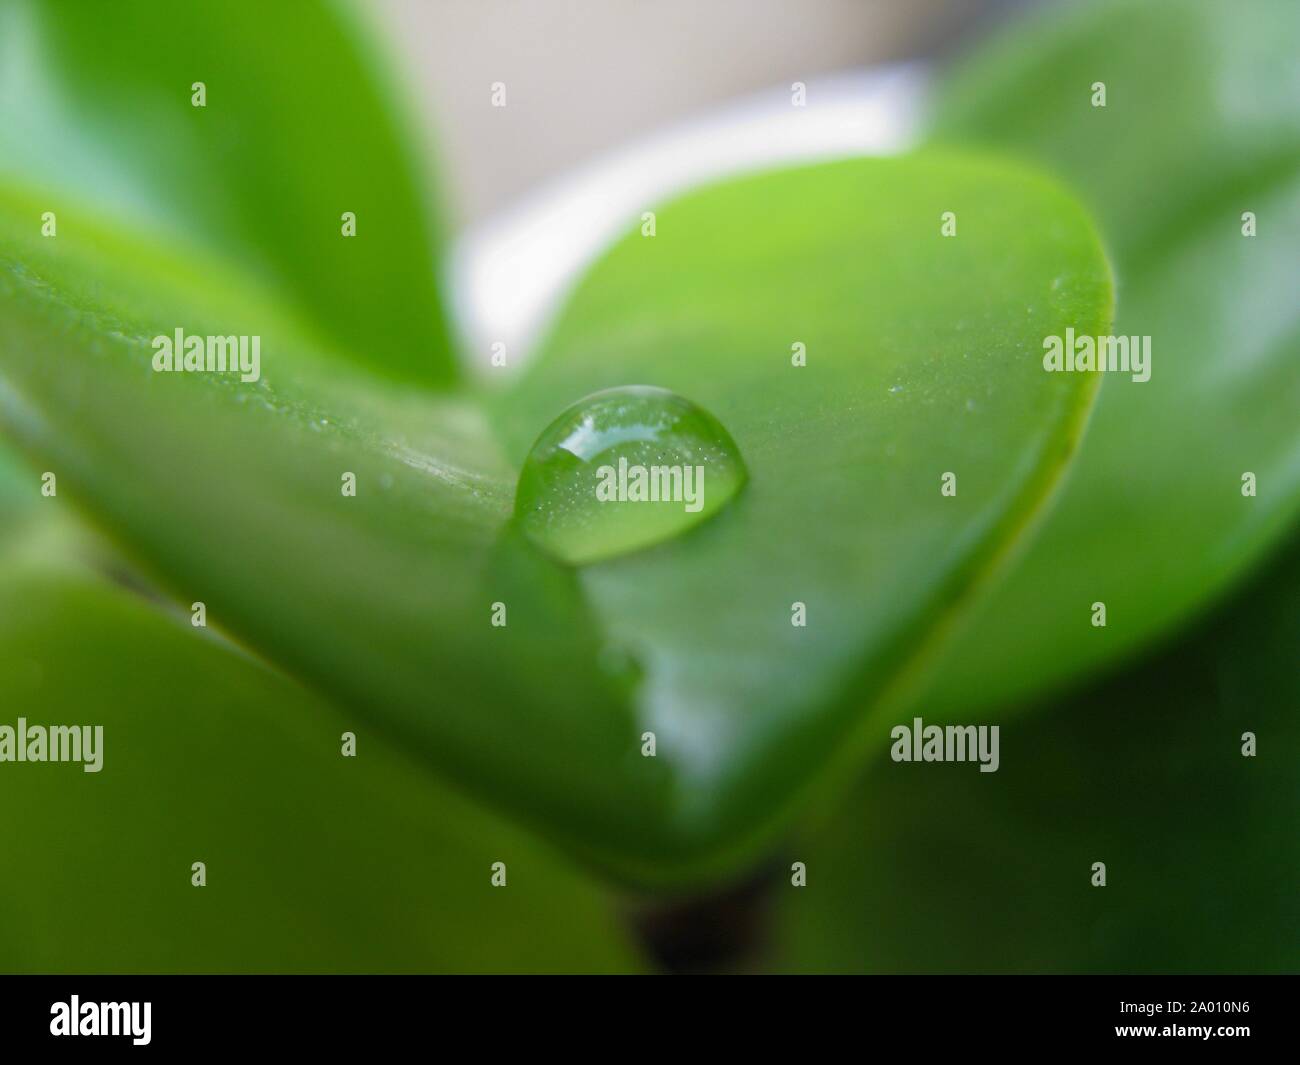 One perfect Drop of Water on a Thick Green Leaf of the Houseplant Crassula ovata (jade plant, lucky plant, money plant or money tree), which is a succ Stock Photo